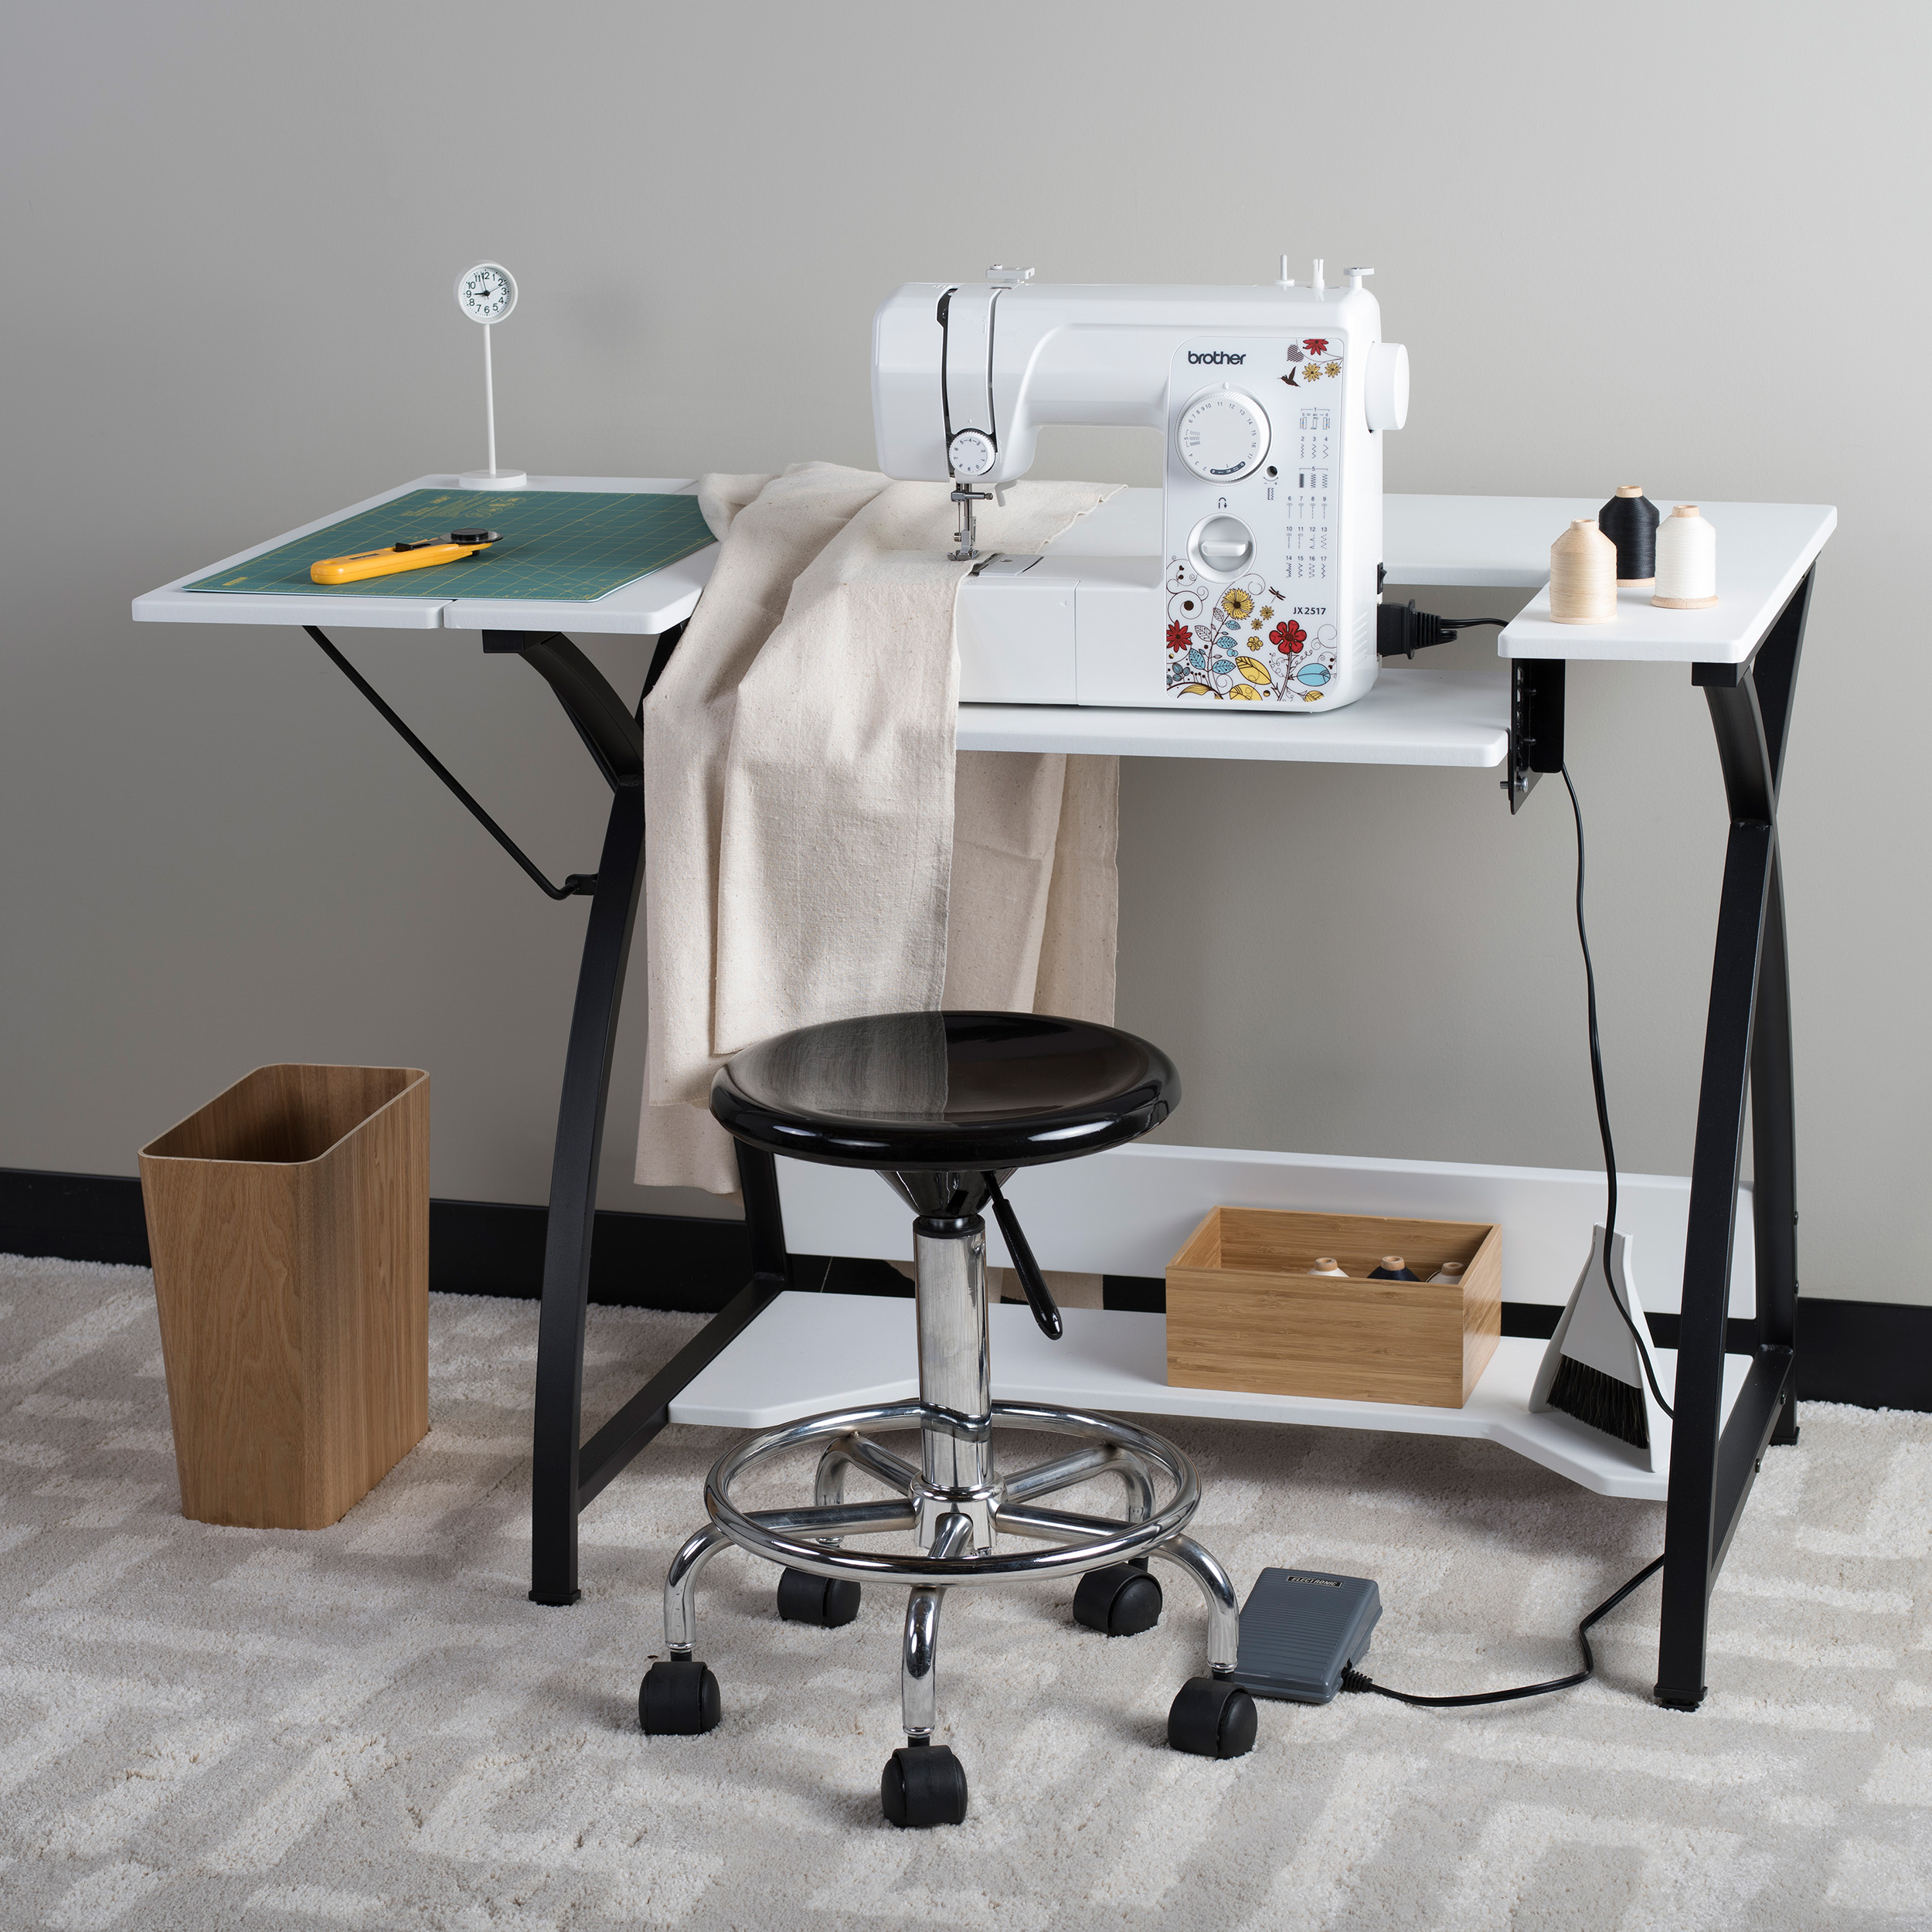 Sew Ready 13332 Comet Modern Sewing Table in Black / White - image 1 of 7